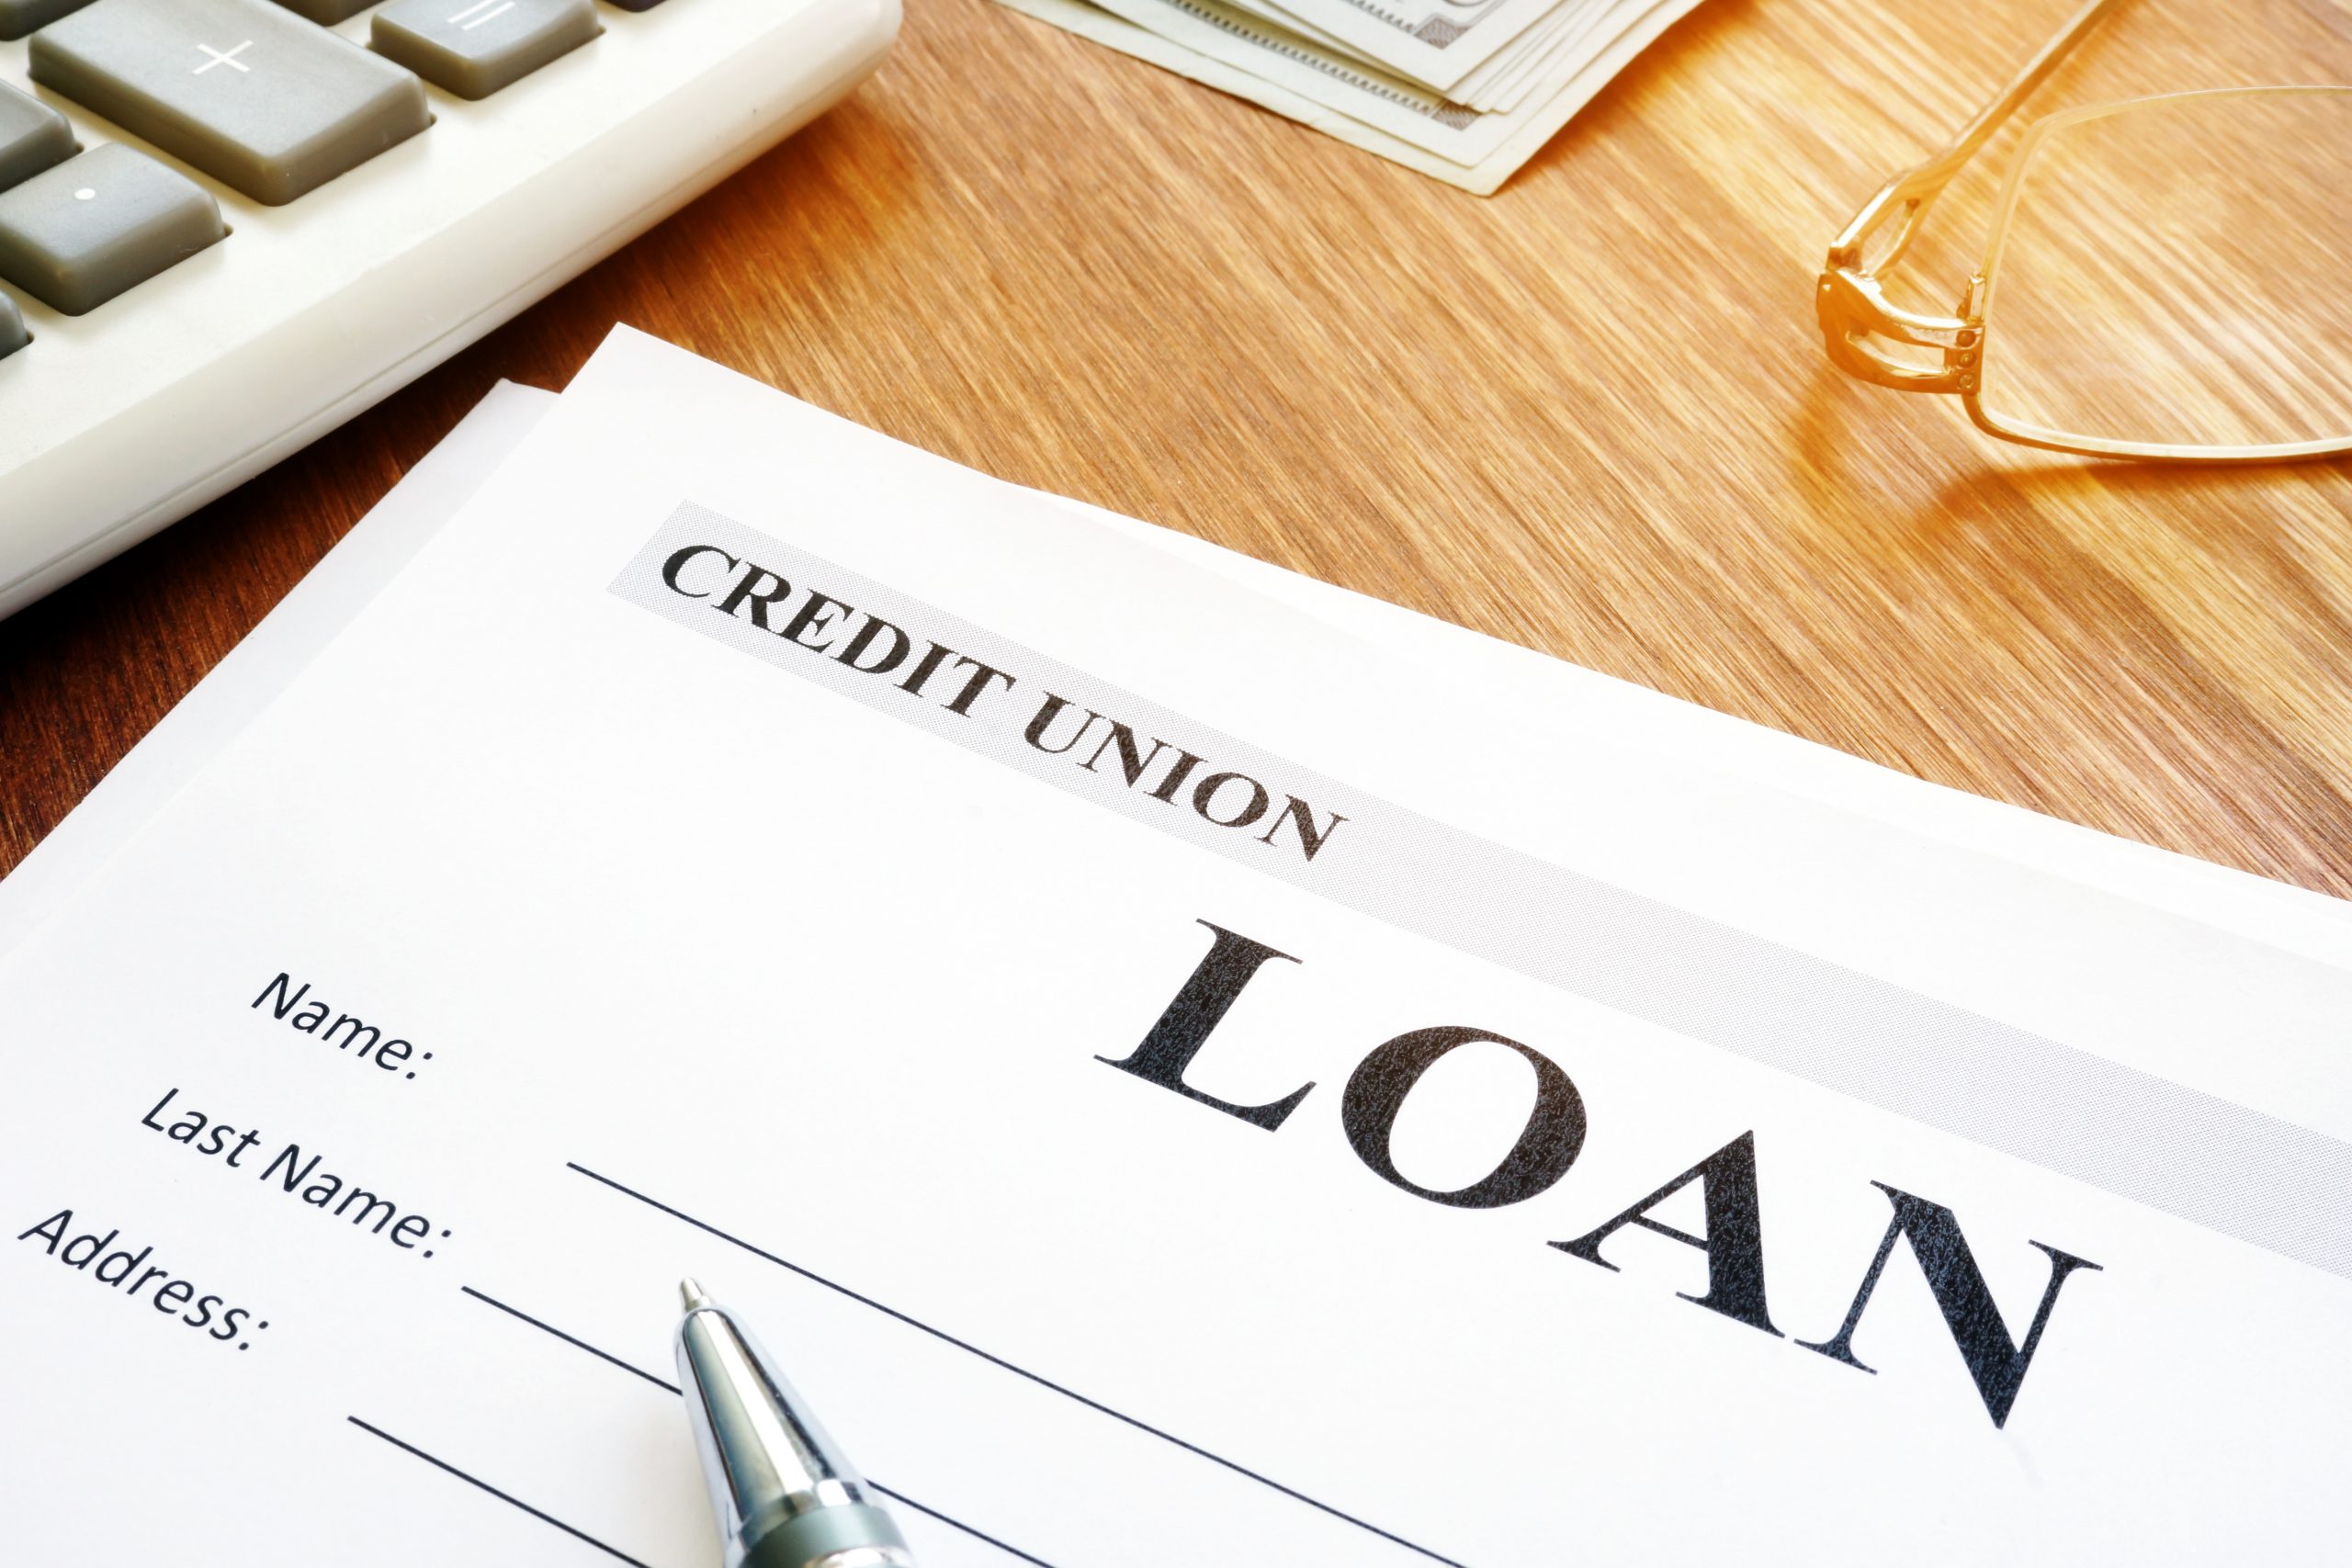 How Does A Credit Union Loan Work?